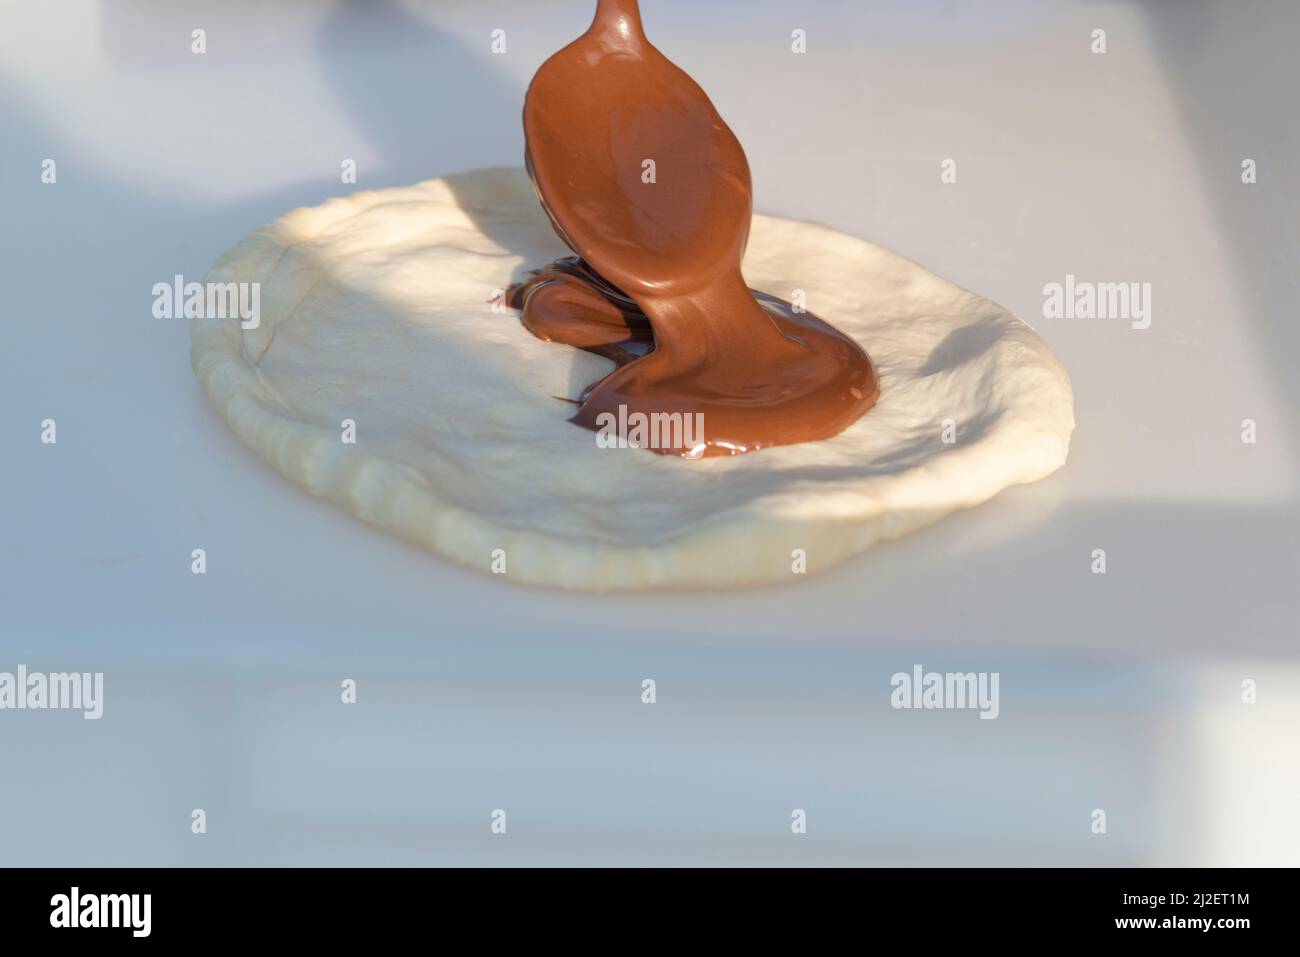 Italy, Lombardy, Street Food, Preparation of Fitters Filled with Chocolate Cream Stock Photo